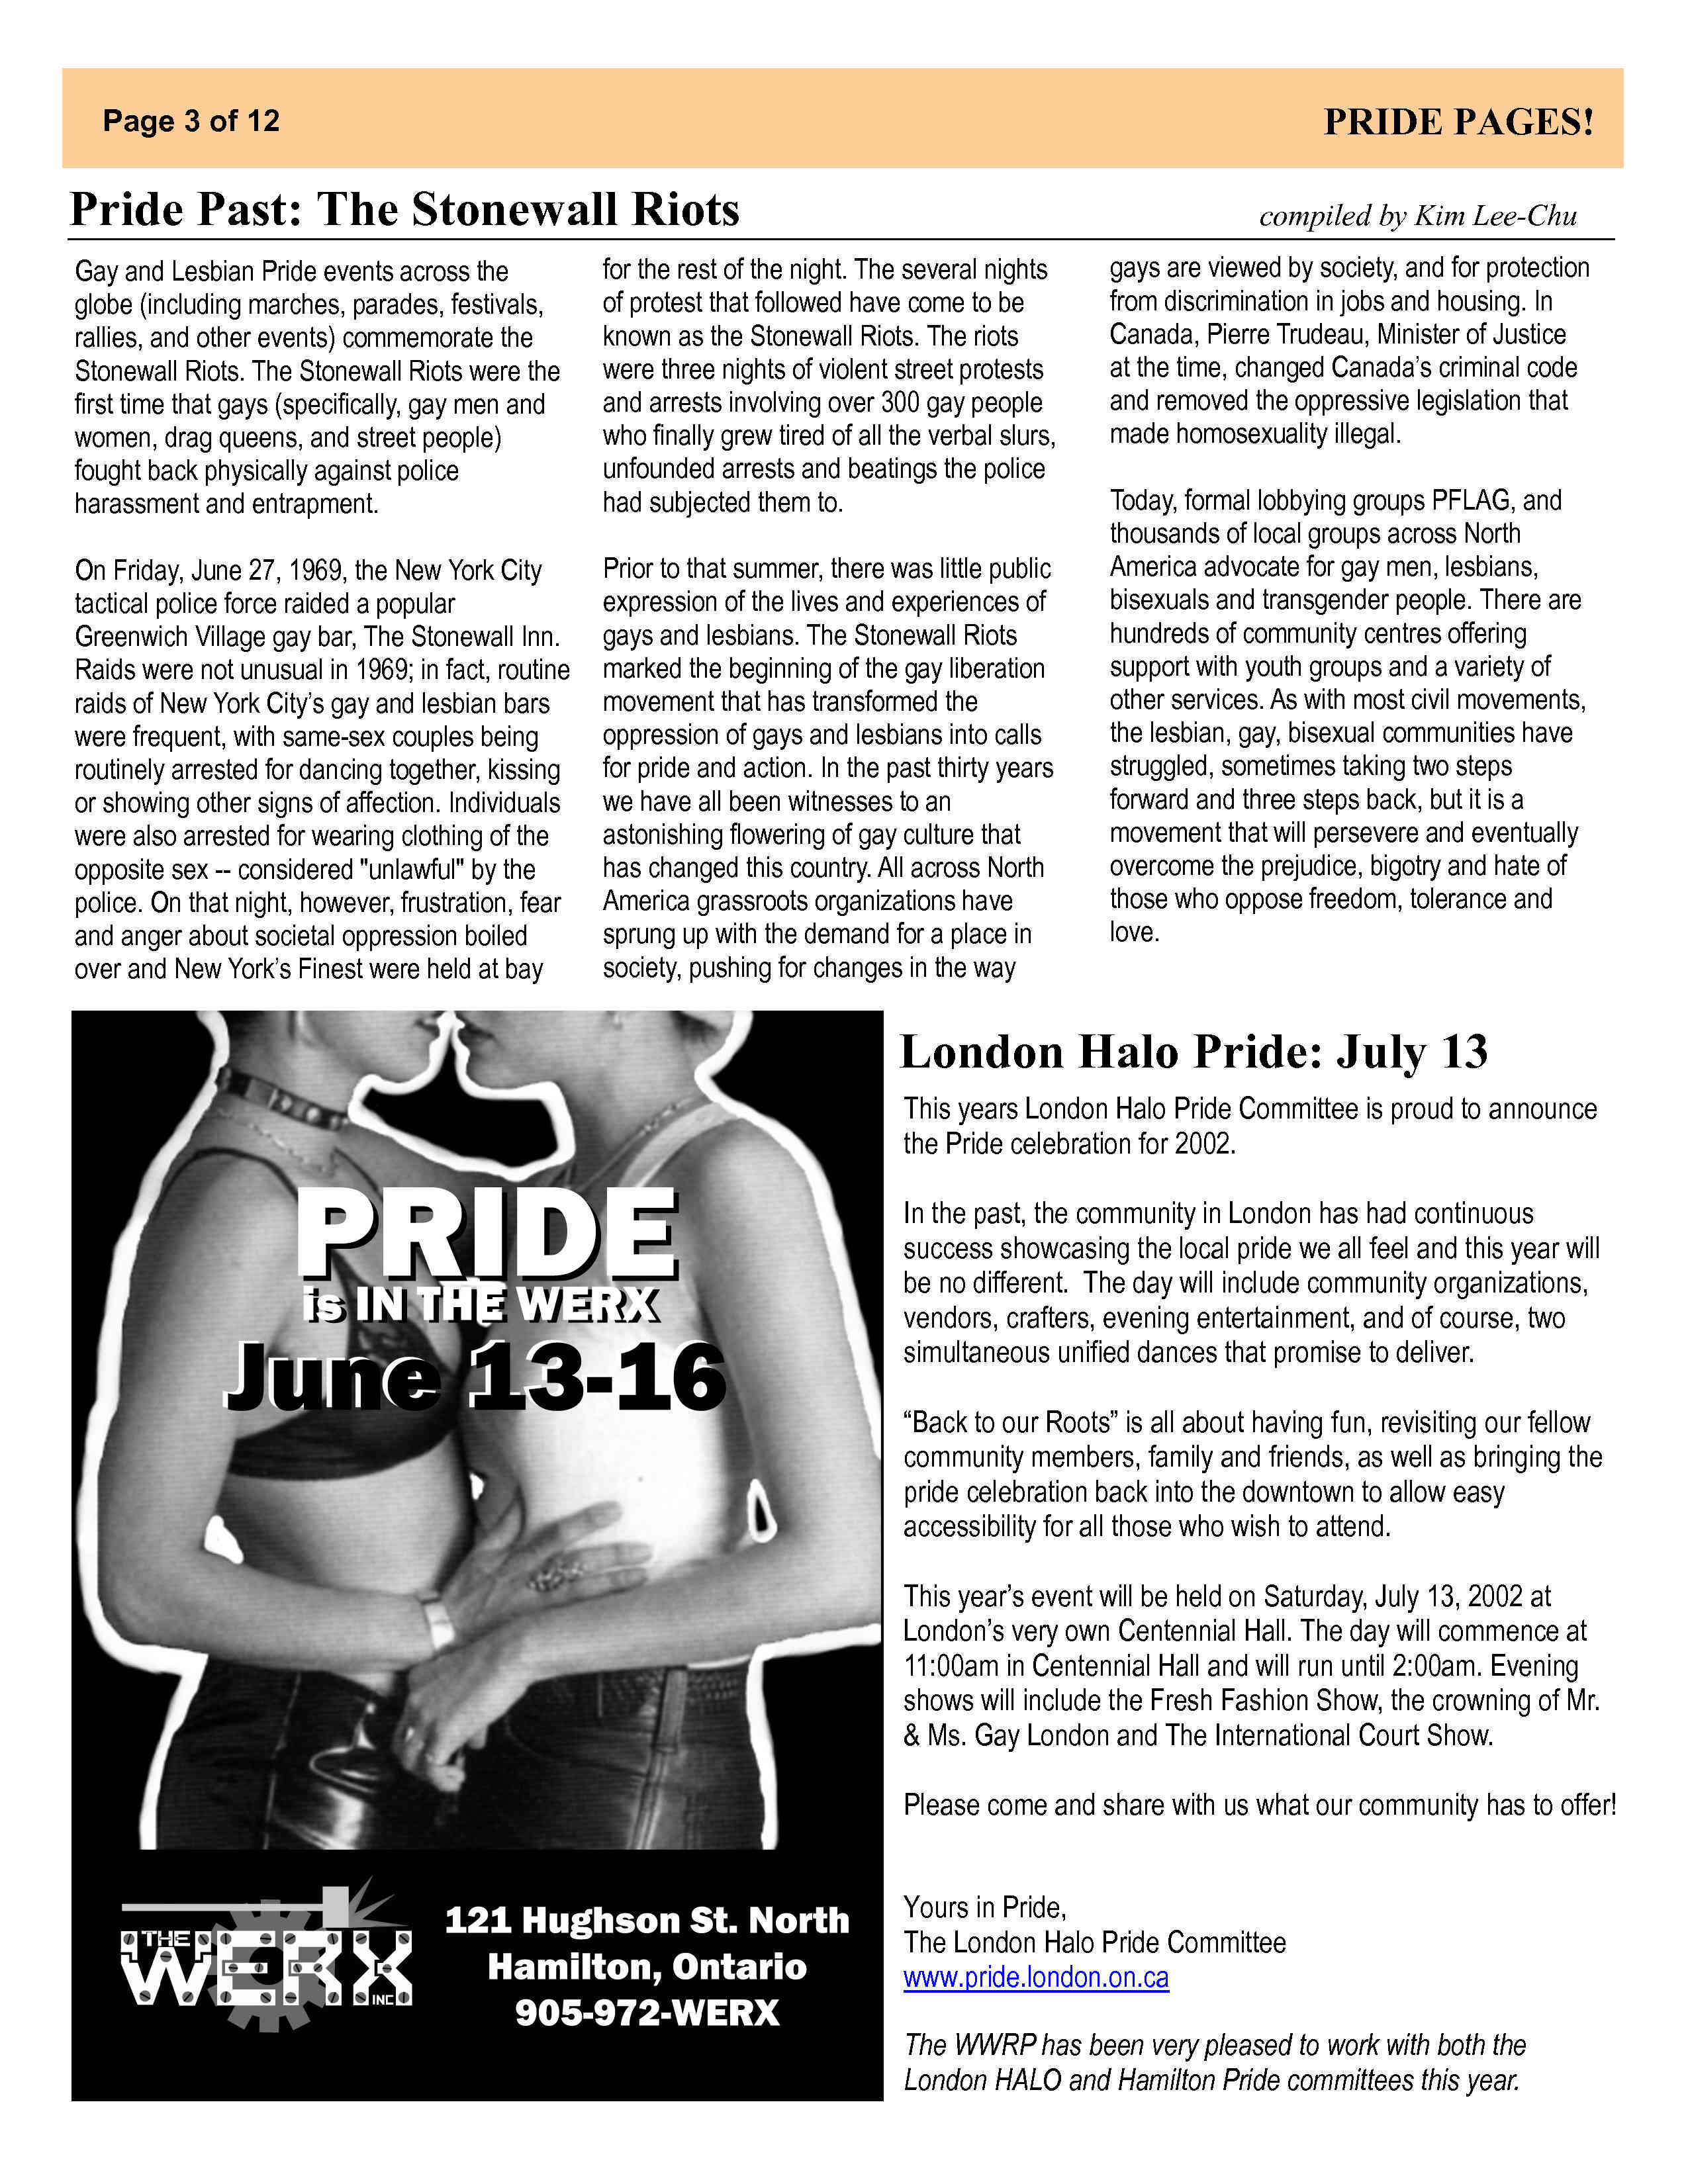 Pride Pages 2002-06 p3